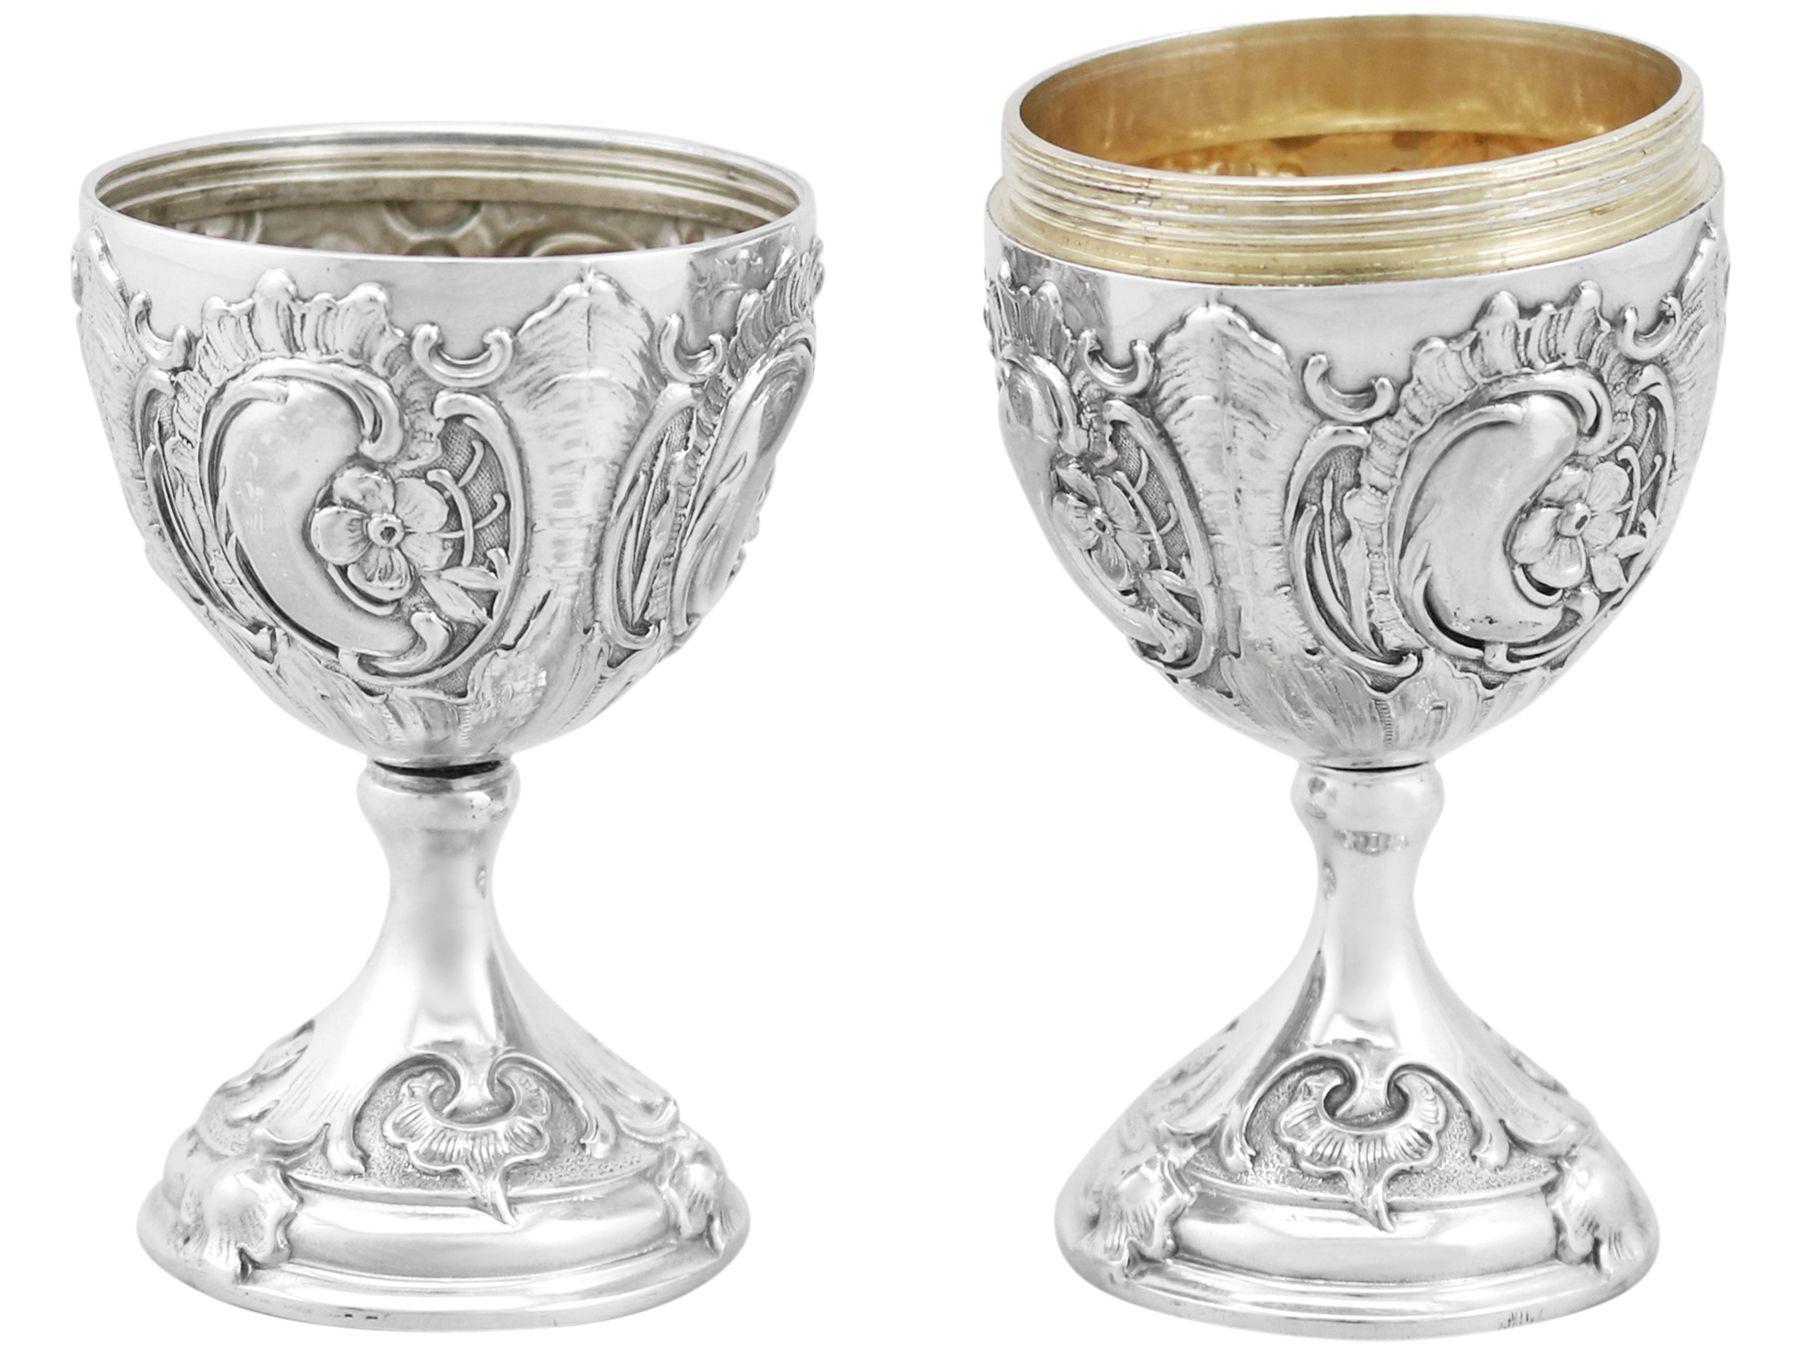 An exceptional, fine and impressive pair of antique Russian silver egg cups; an addition to our silver cruet and condiment collection.

These exceptional antique Russian silver egg cups have a circular rounded form to a swept pedestal foot.

The